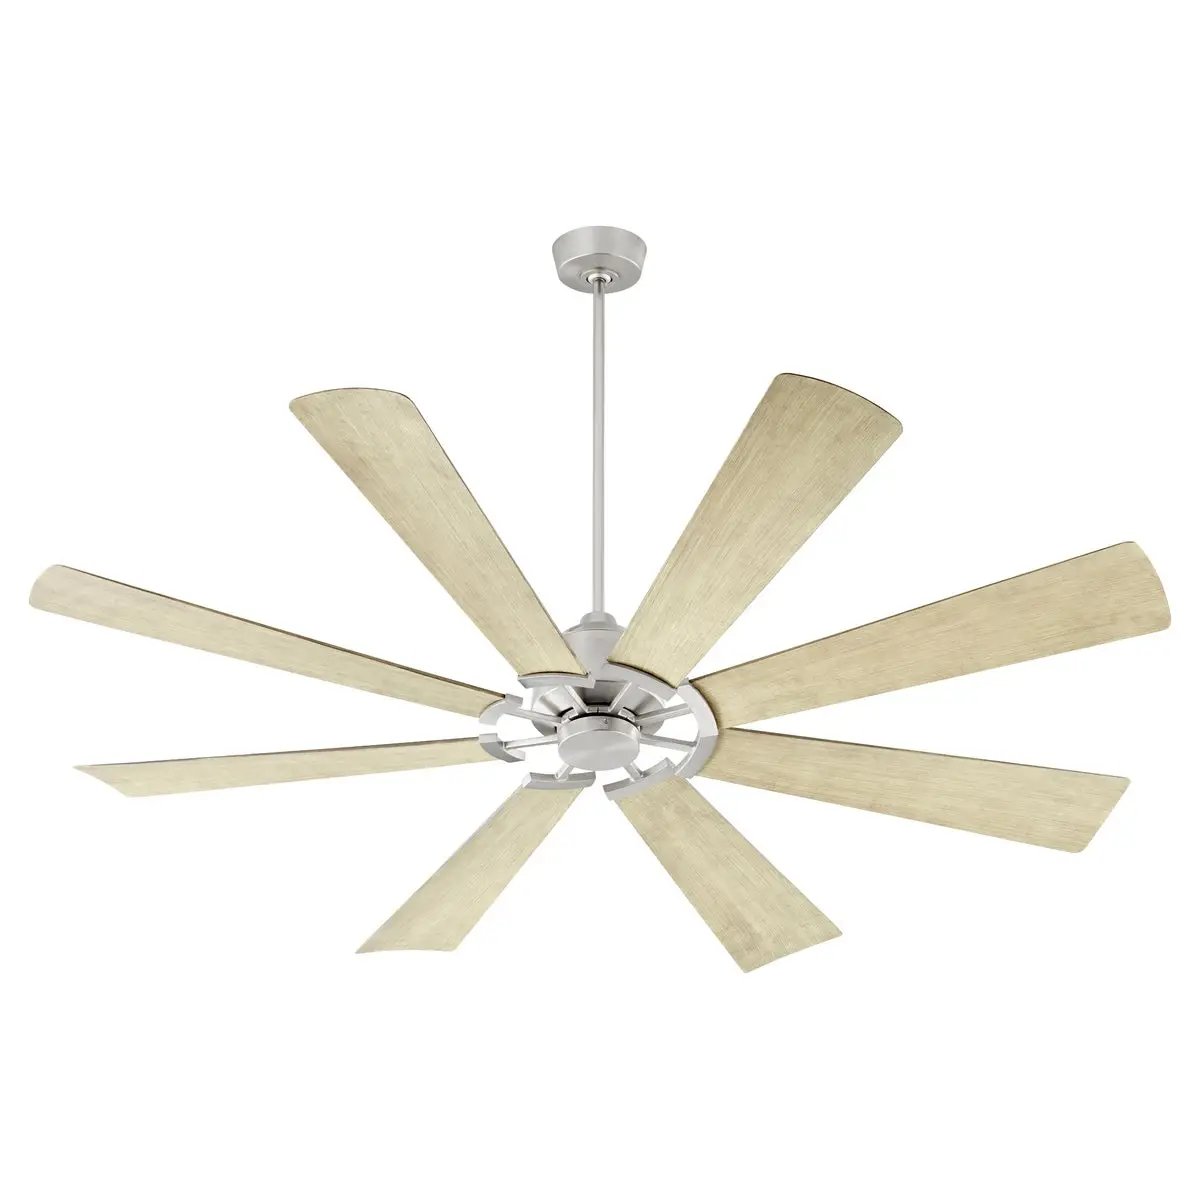 A modern ceiling fan with 8 blades, perfect for mid-sized and larger spaces. Damp listed for outdoor covered areas. Elevate your space with this Quorum International fan.